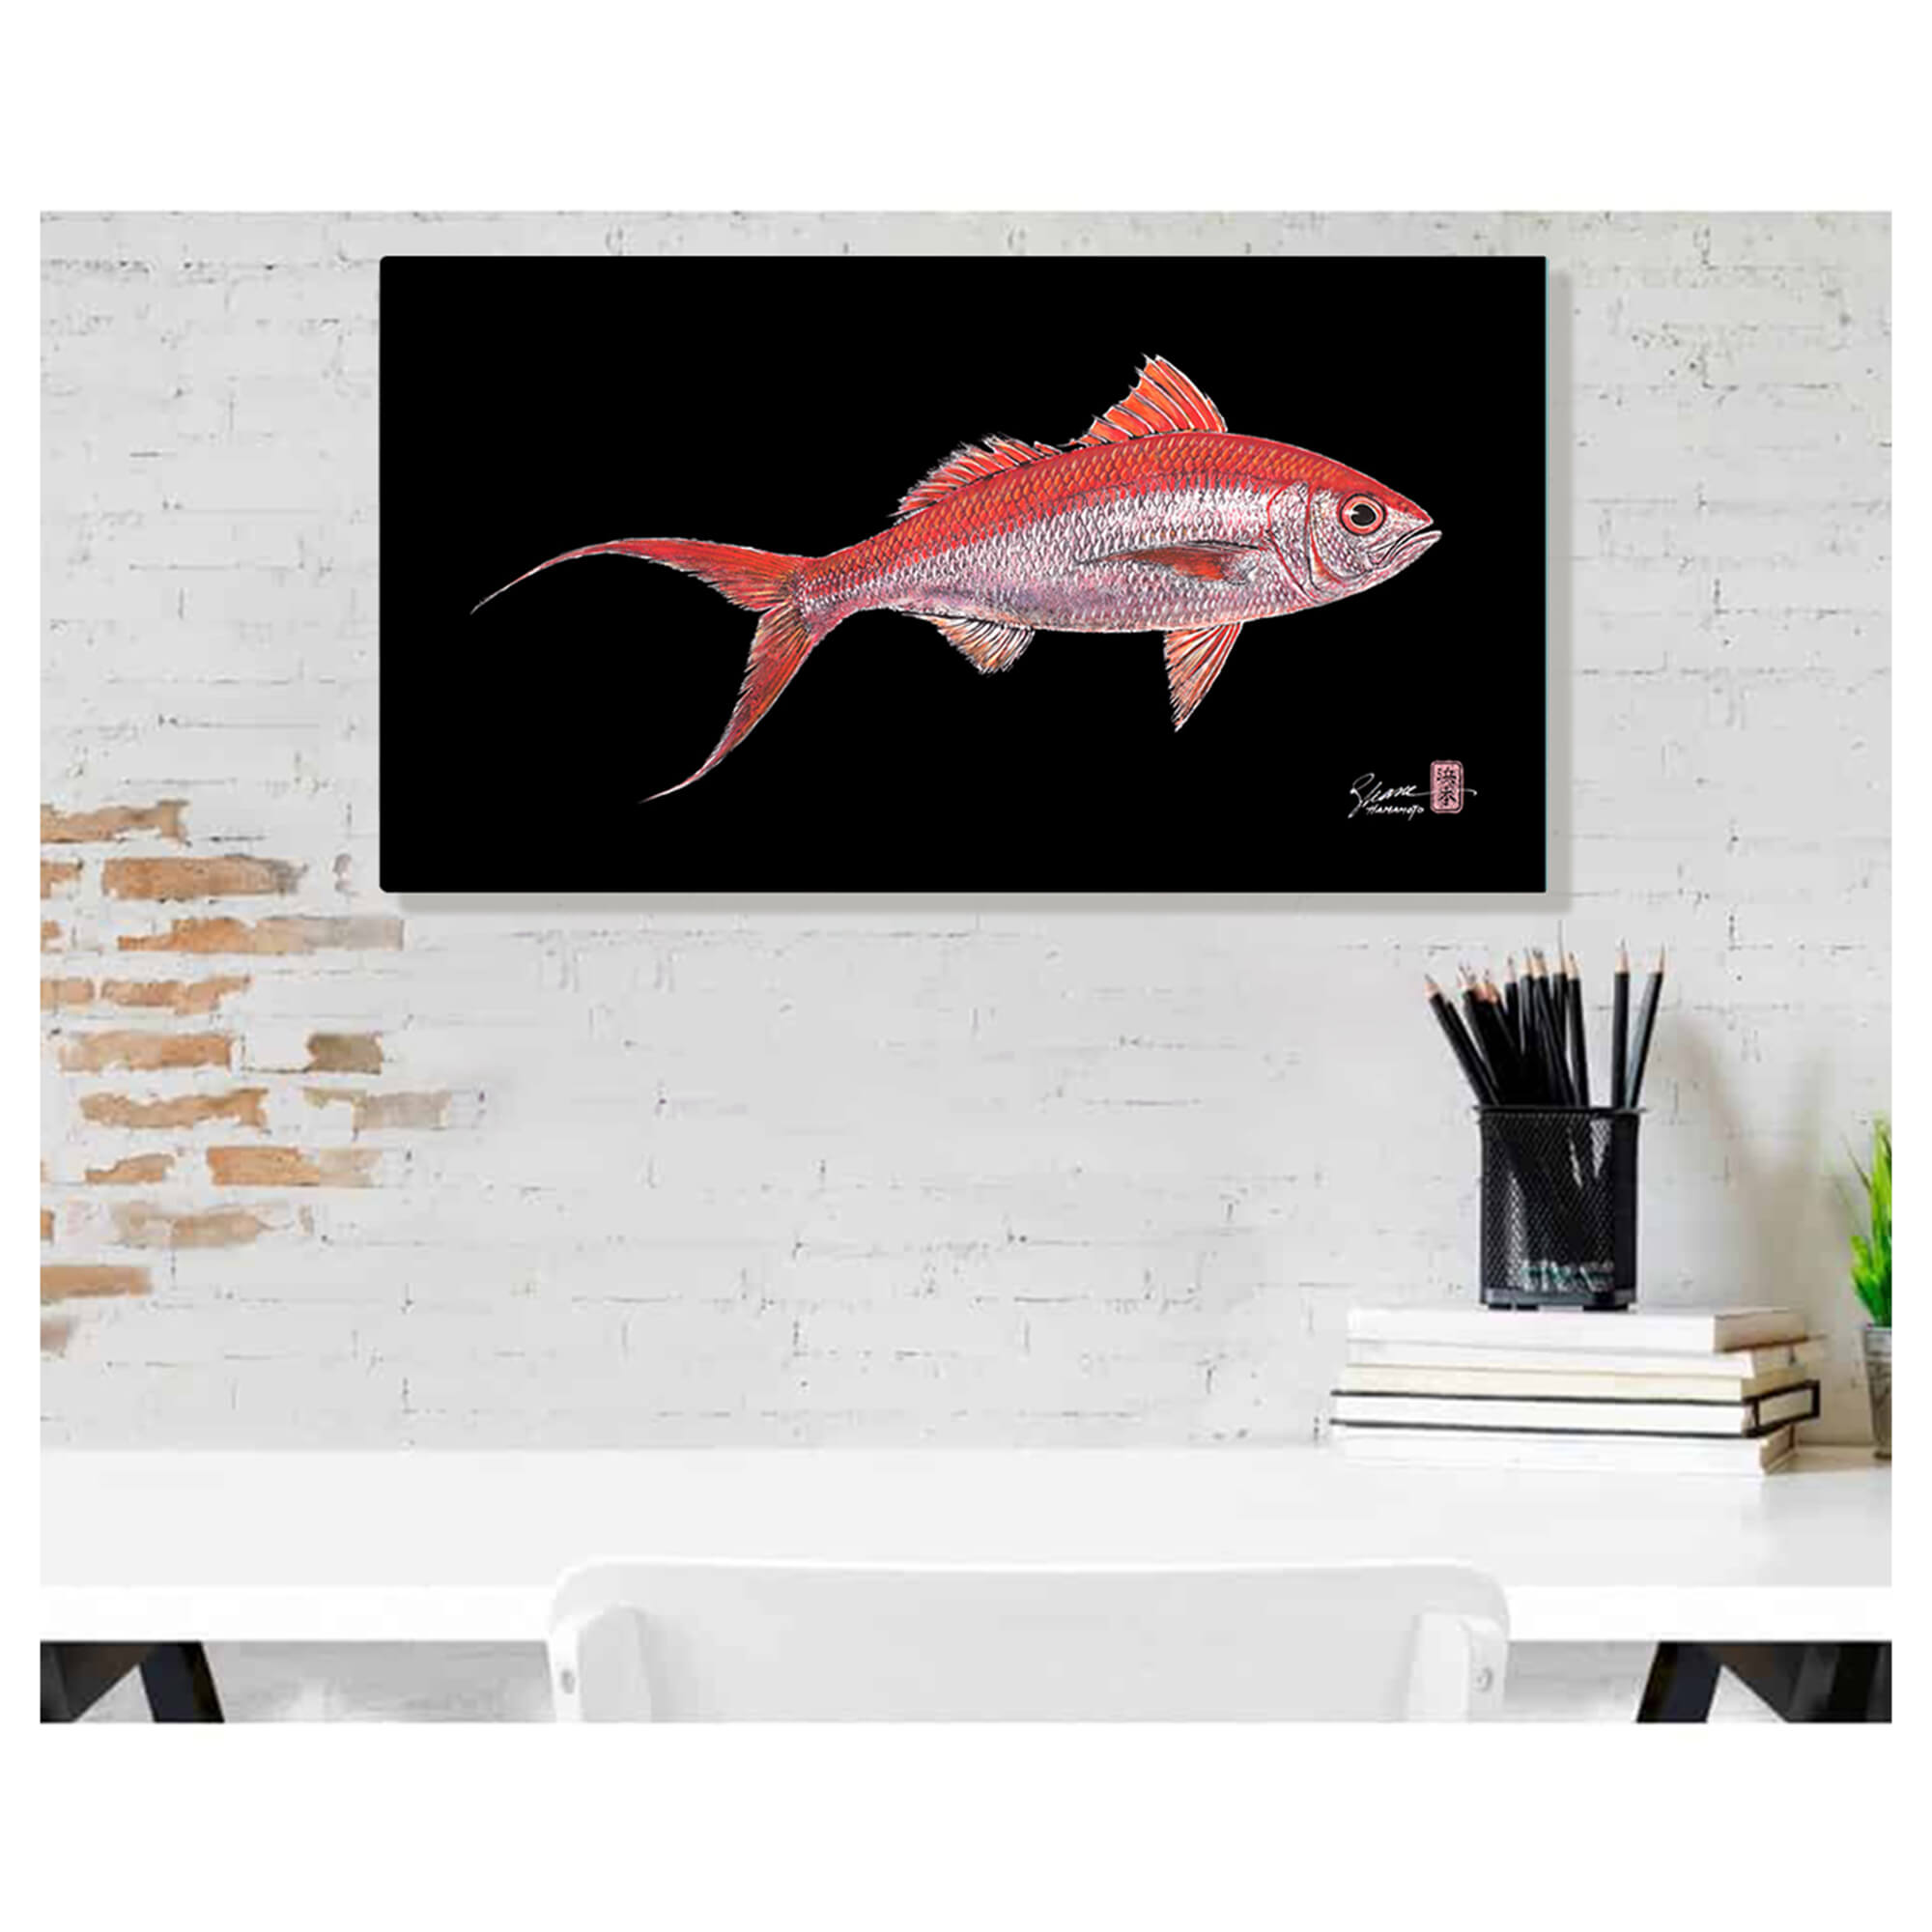 Metal print of Onaga (also known as Ruby Snapper or Scarlet Snapper) by Hawaii gyotaku artist Shane Hamamoto